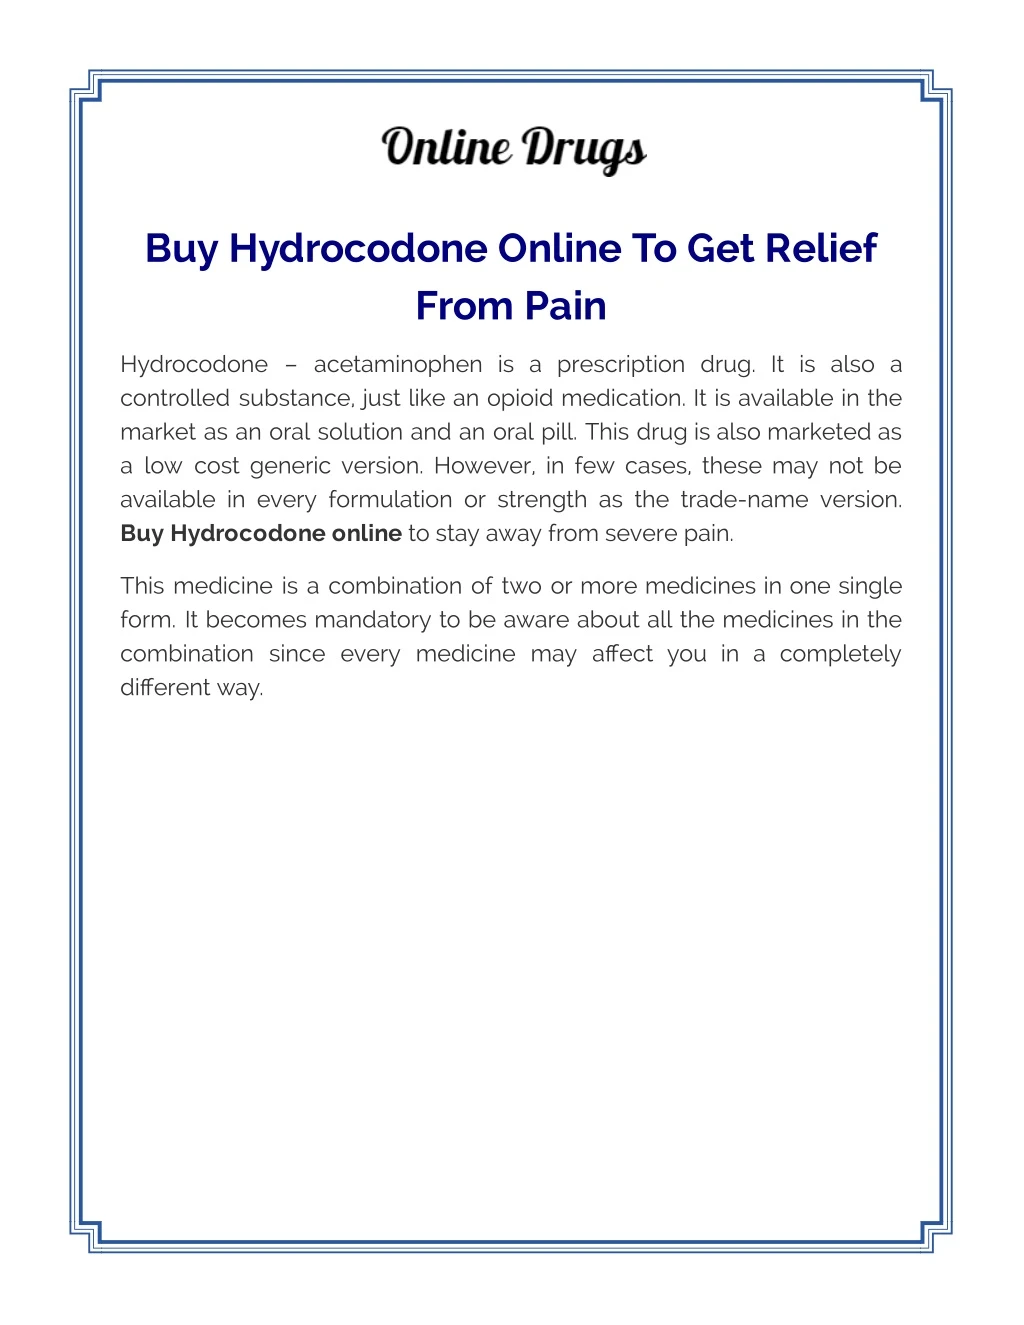 buy hydrocodone online to get relief from pain